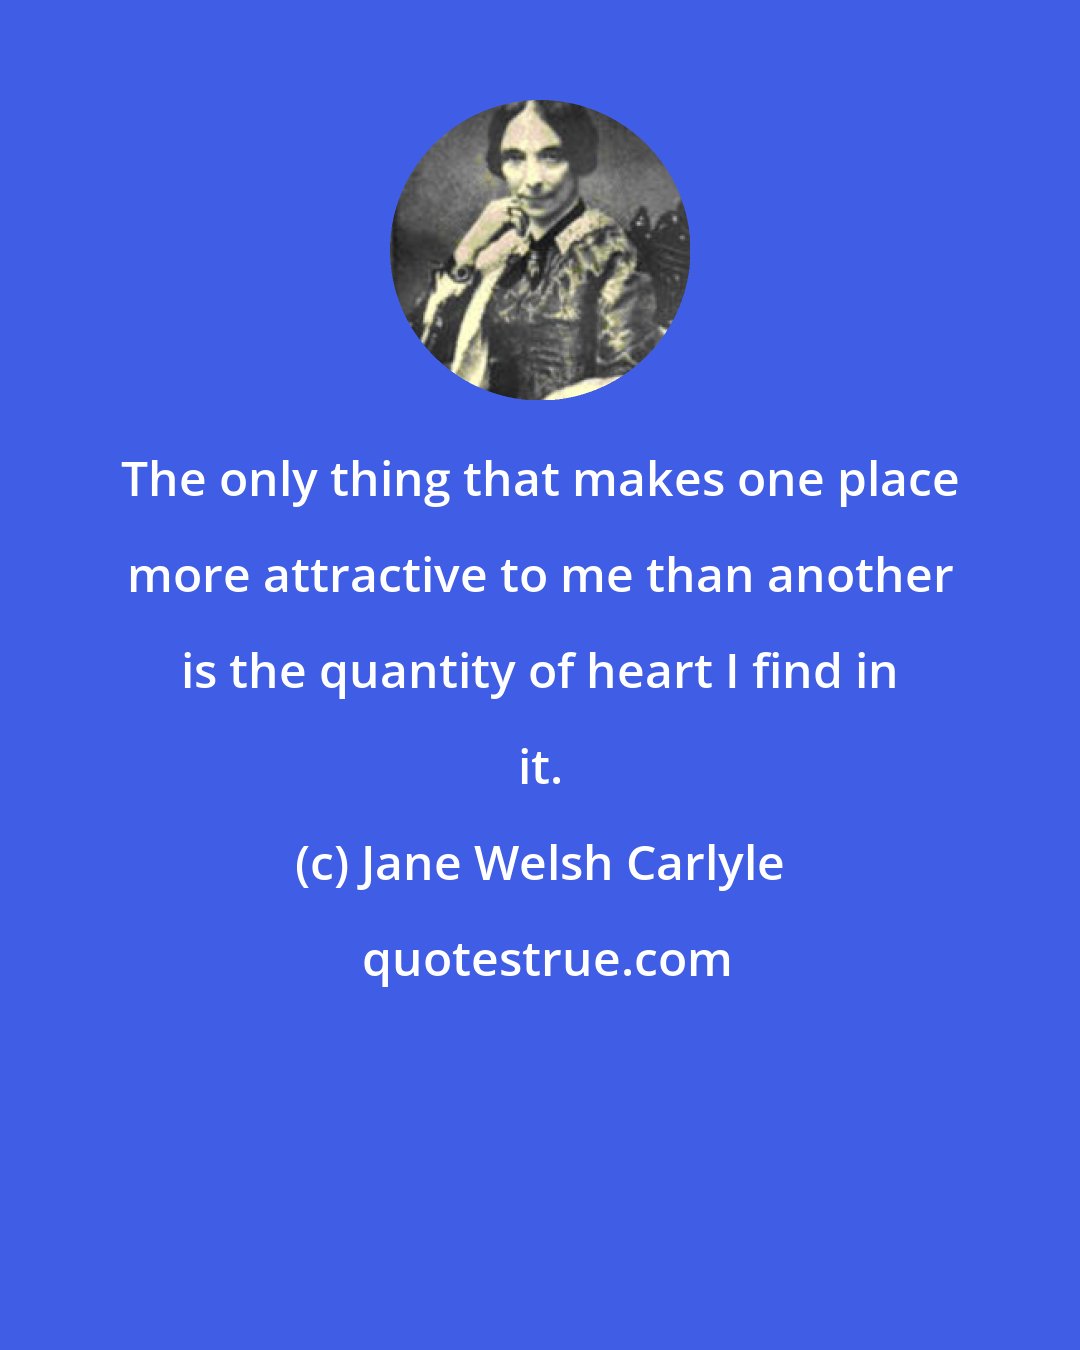 Jane Welsh Carlyle: The only thing that makes one place more attractive to me than another is the quantity of heart I find in it.